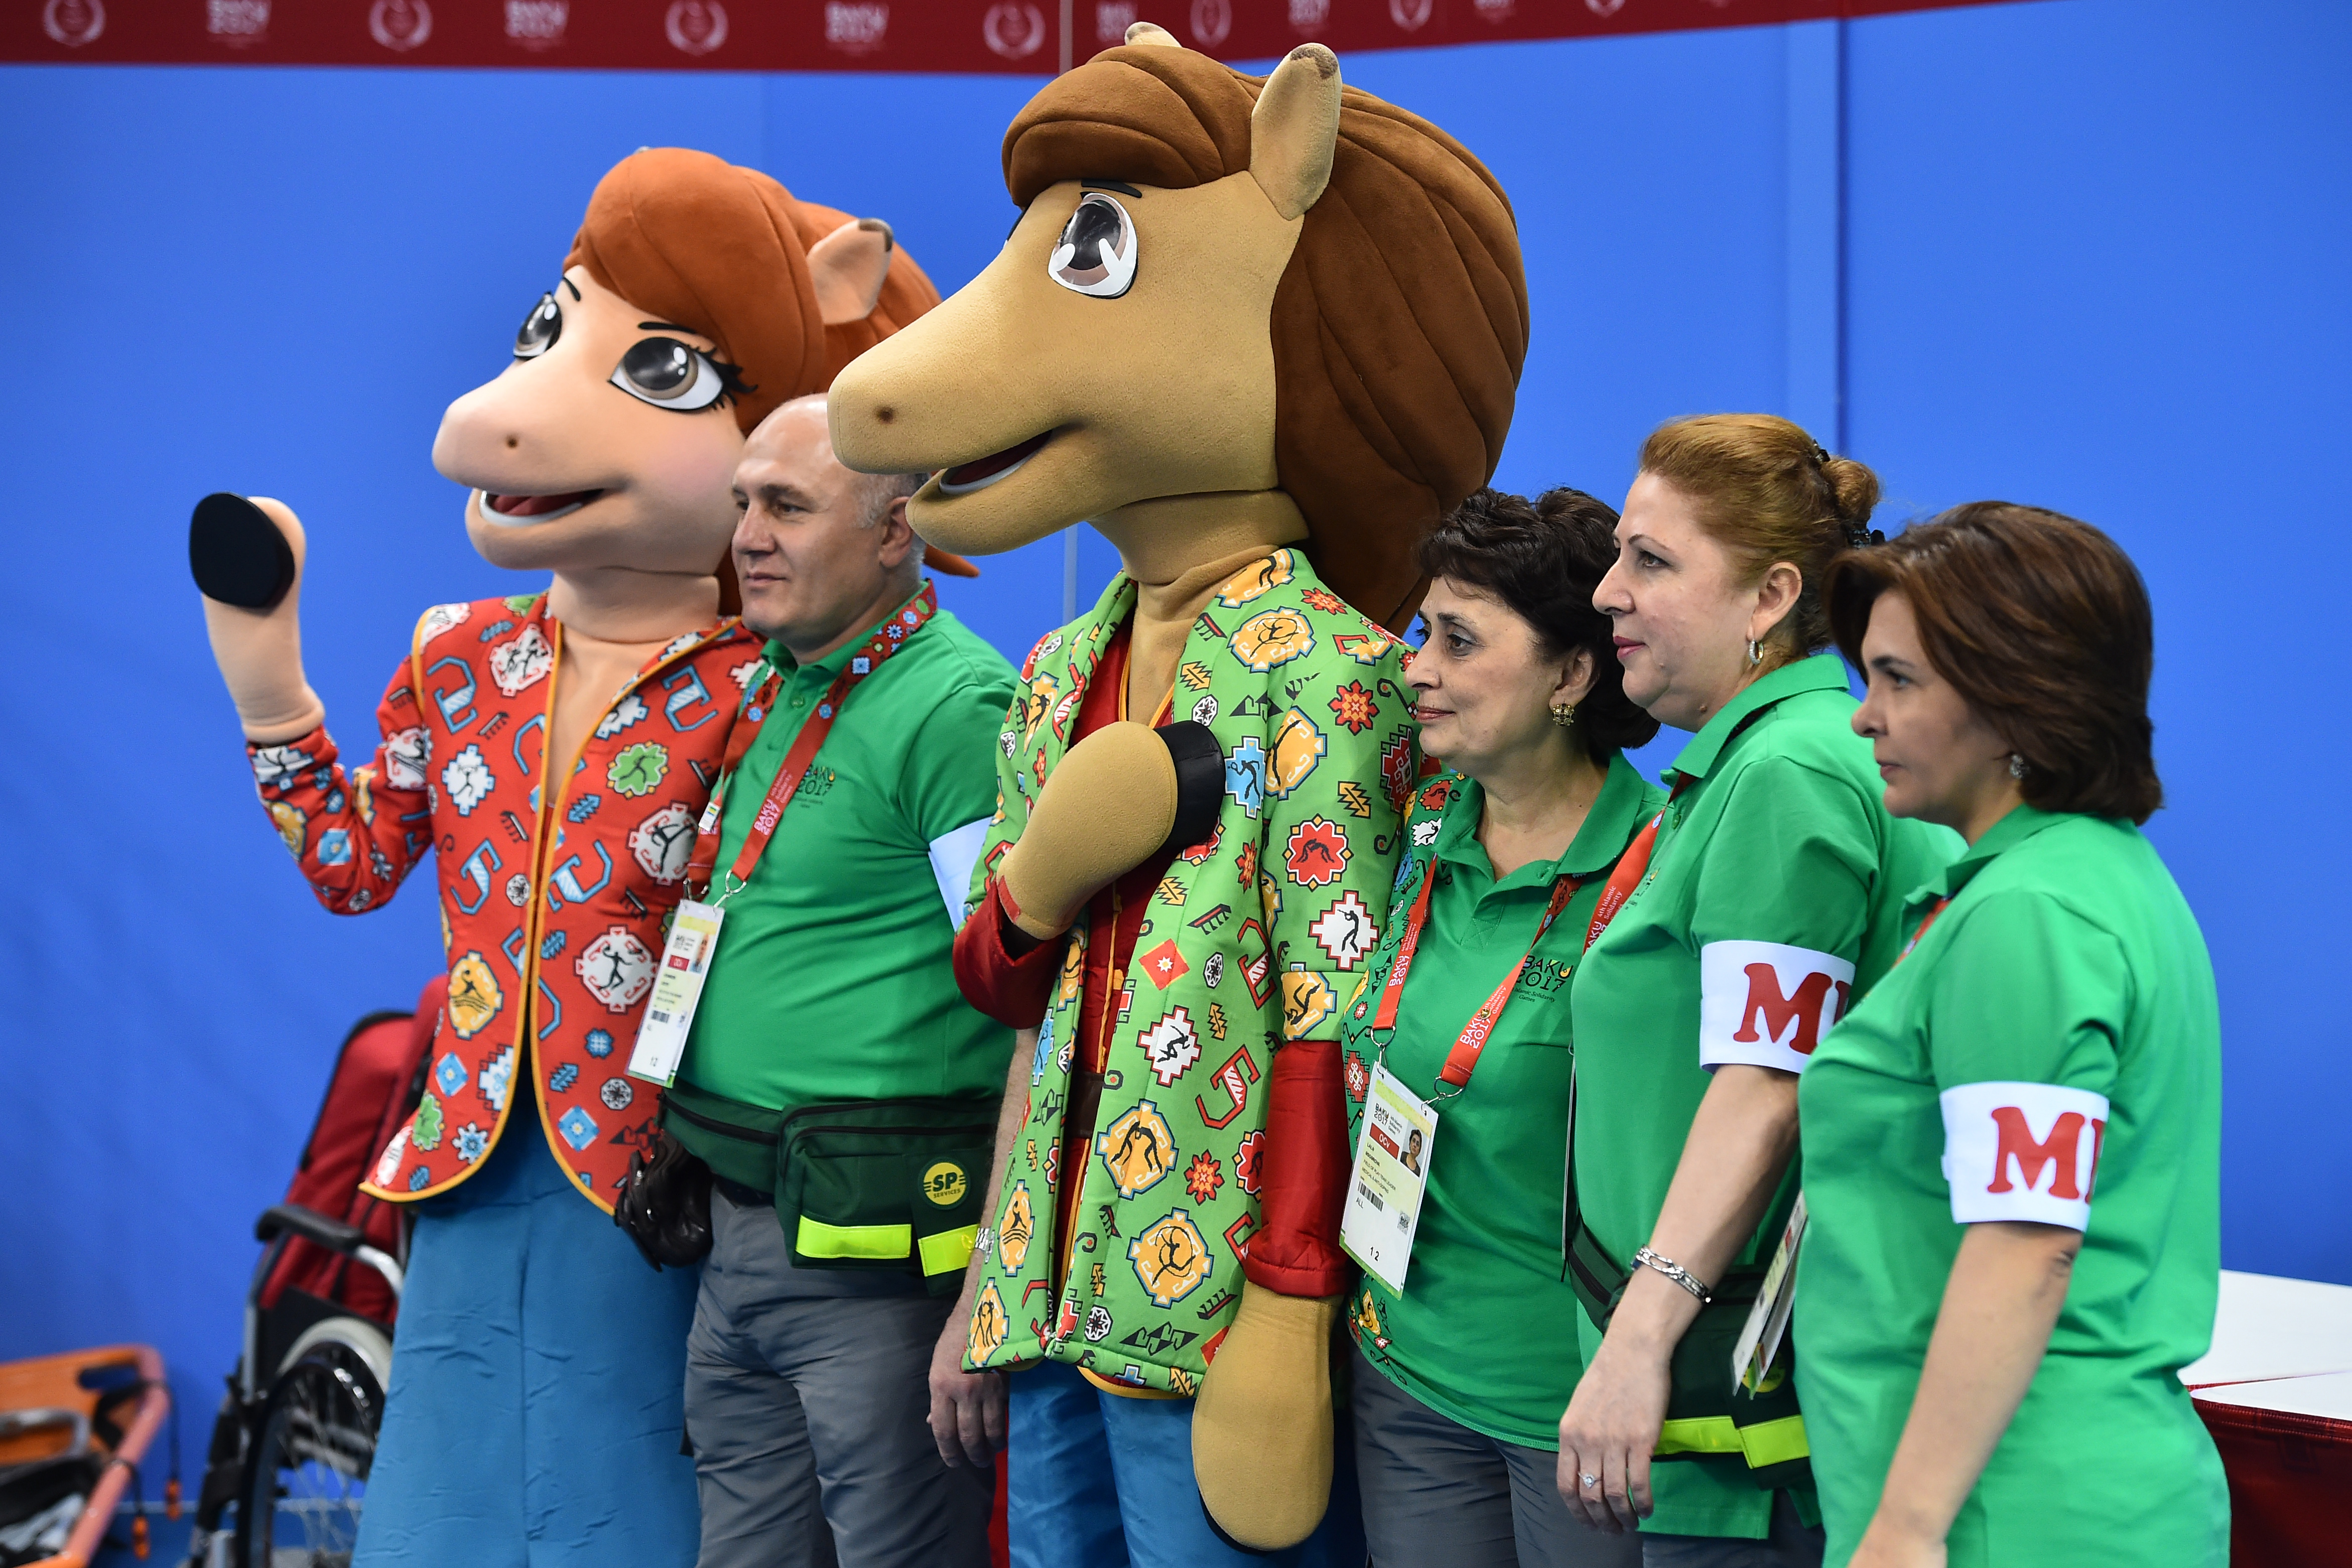 Baku 2017 4th Islamic Solidarity Games' mascots pose with volunteers at the Sarhadchi Sports Olympic Center, in Baku, on May 14, 2017.